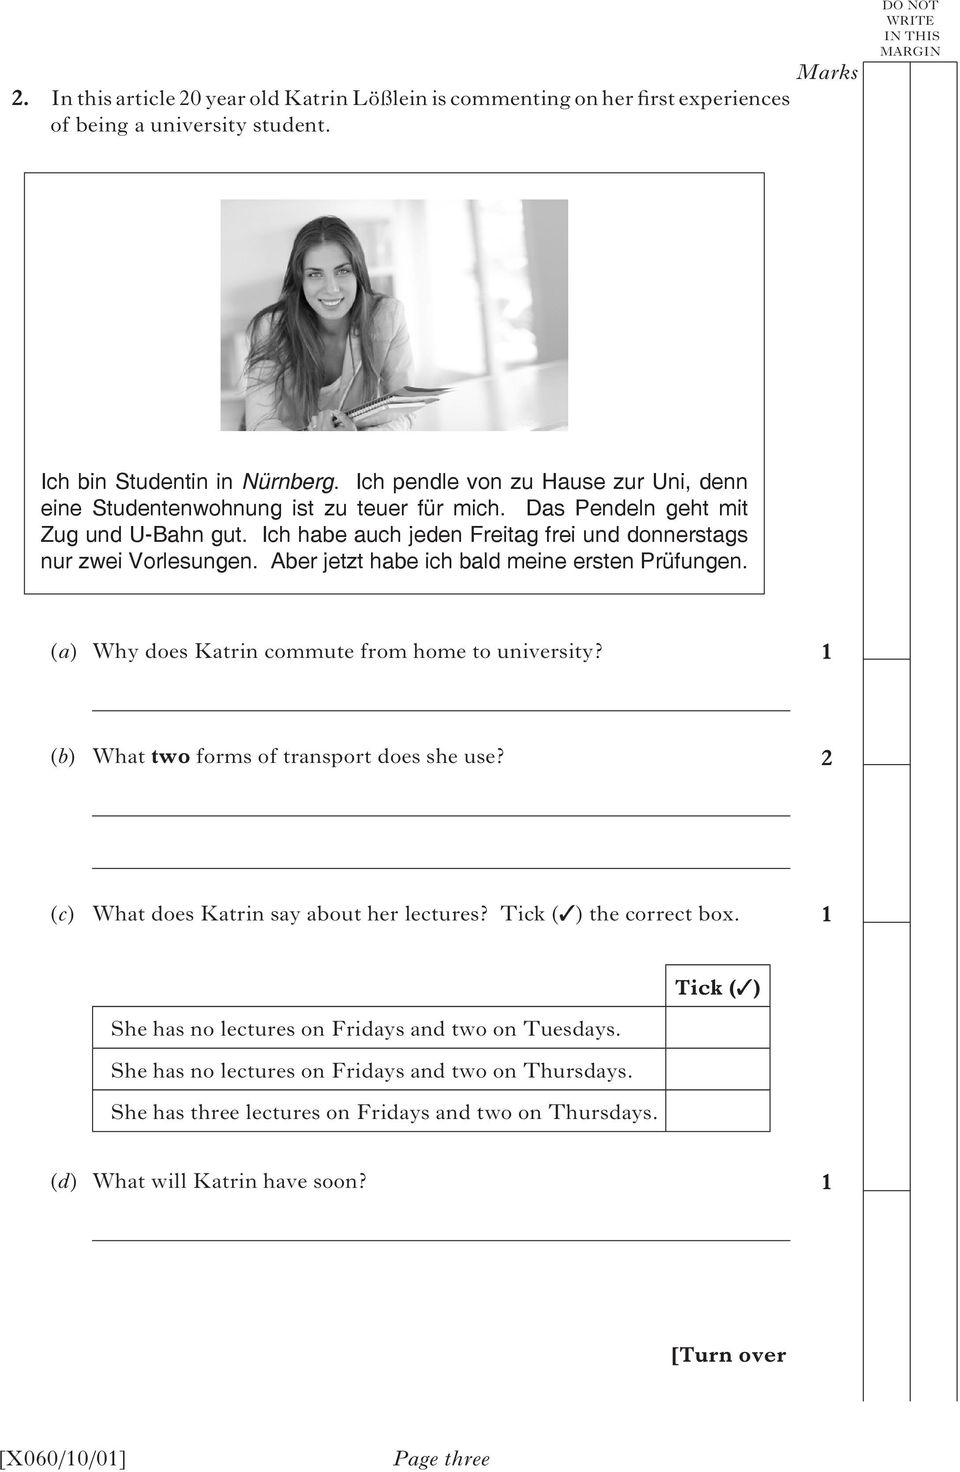 Aber jetzt habe ich bald meine ersten Prüfungen. (a) Why does Katrin commute from home to university? (b) What two forms of transport does she use? (c) What does Katrin say about her lectures?